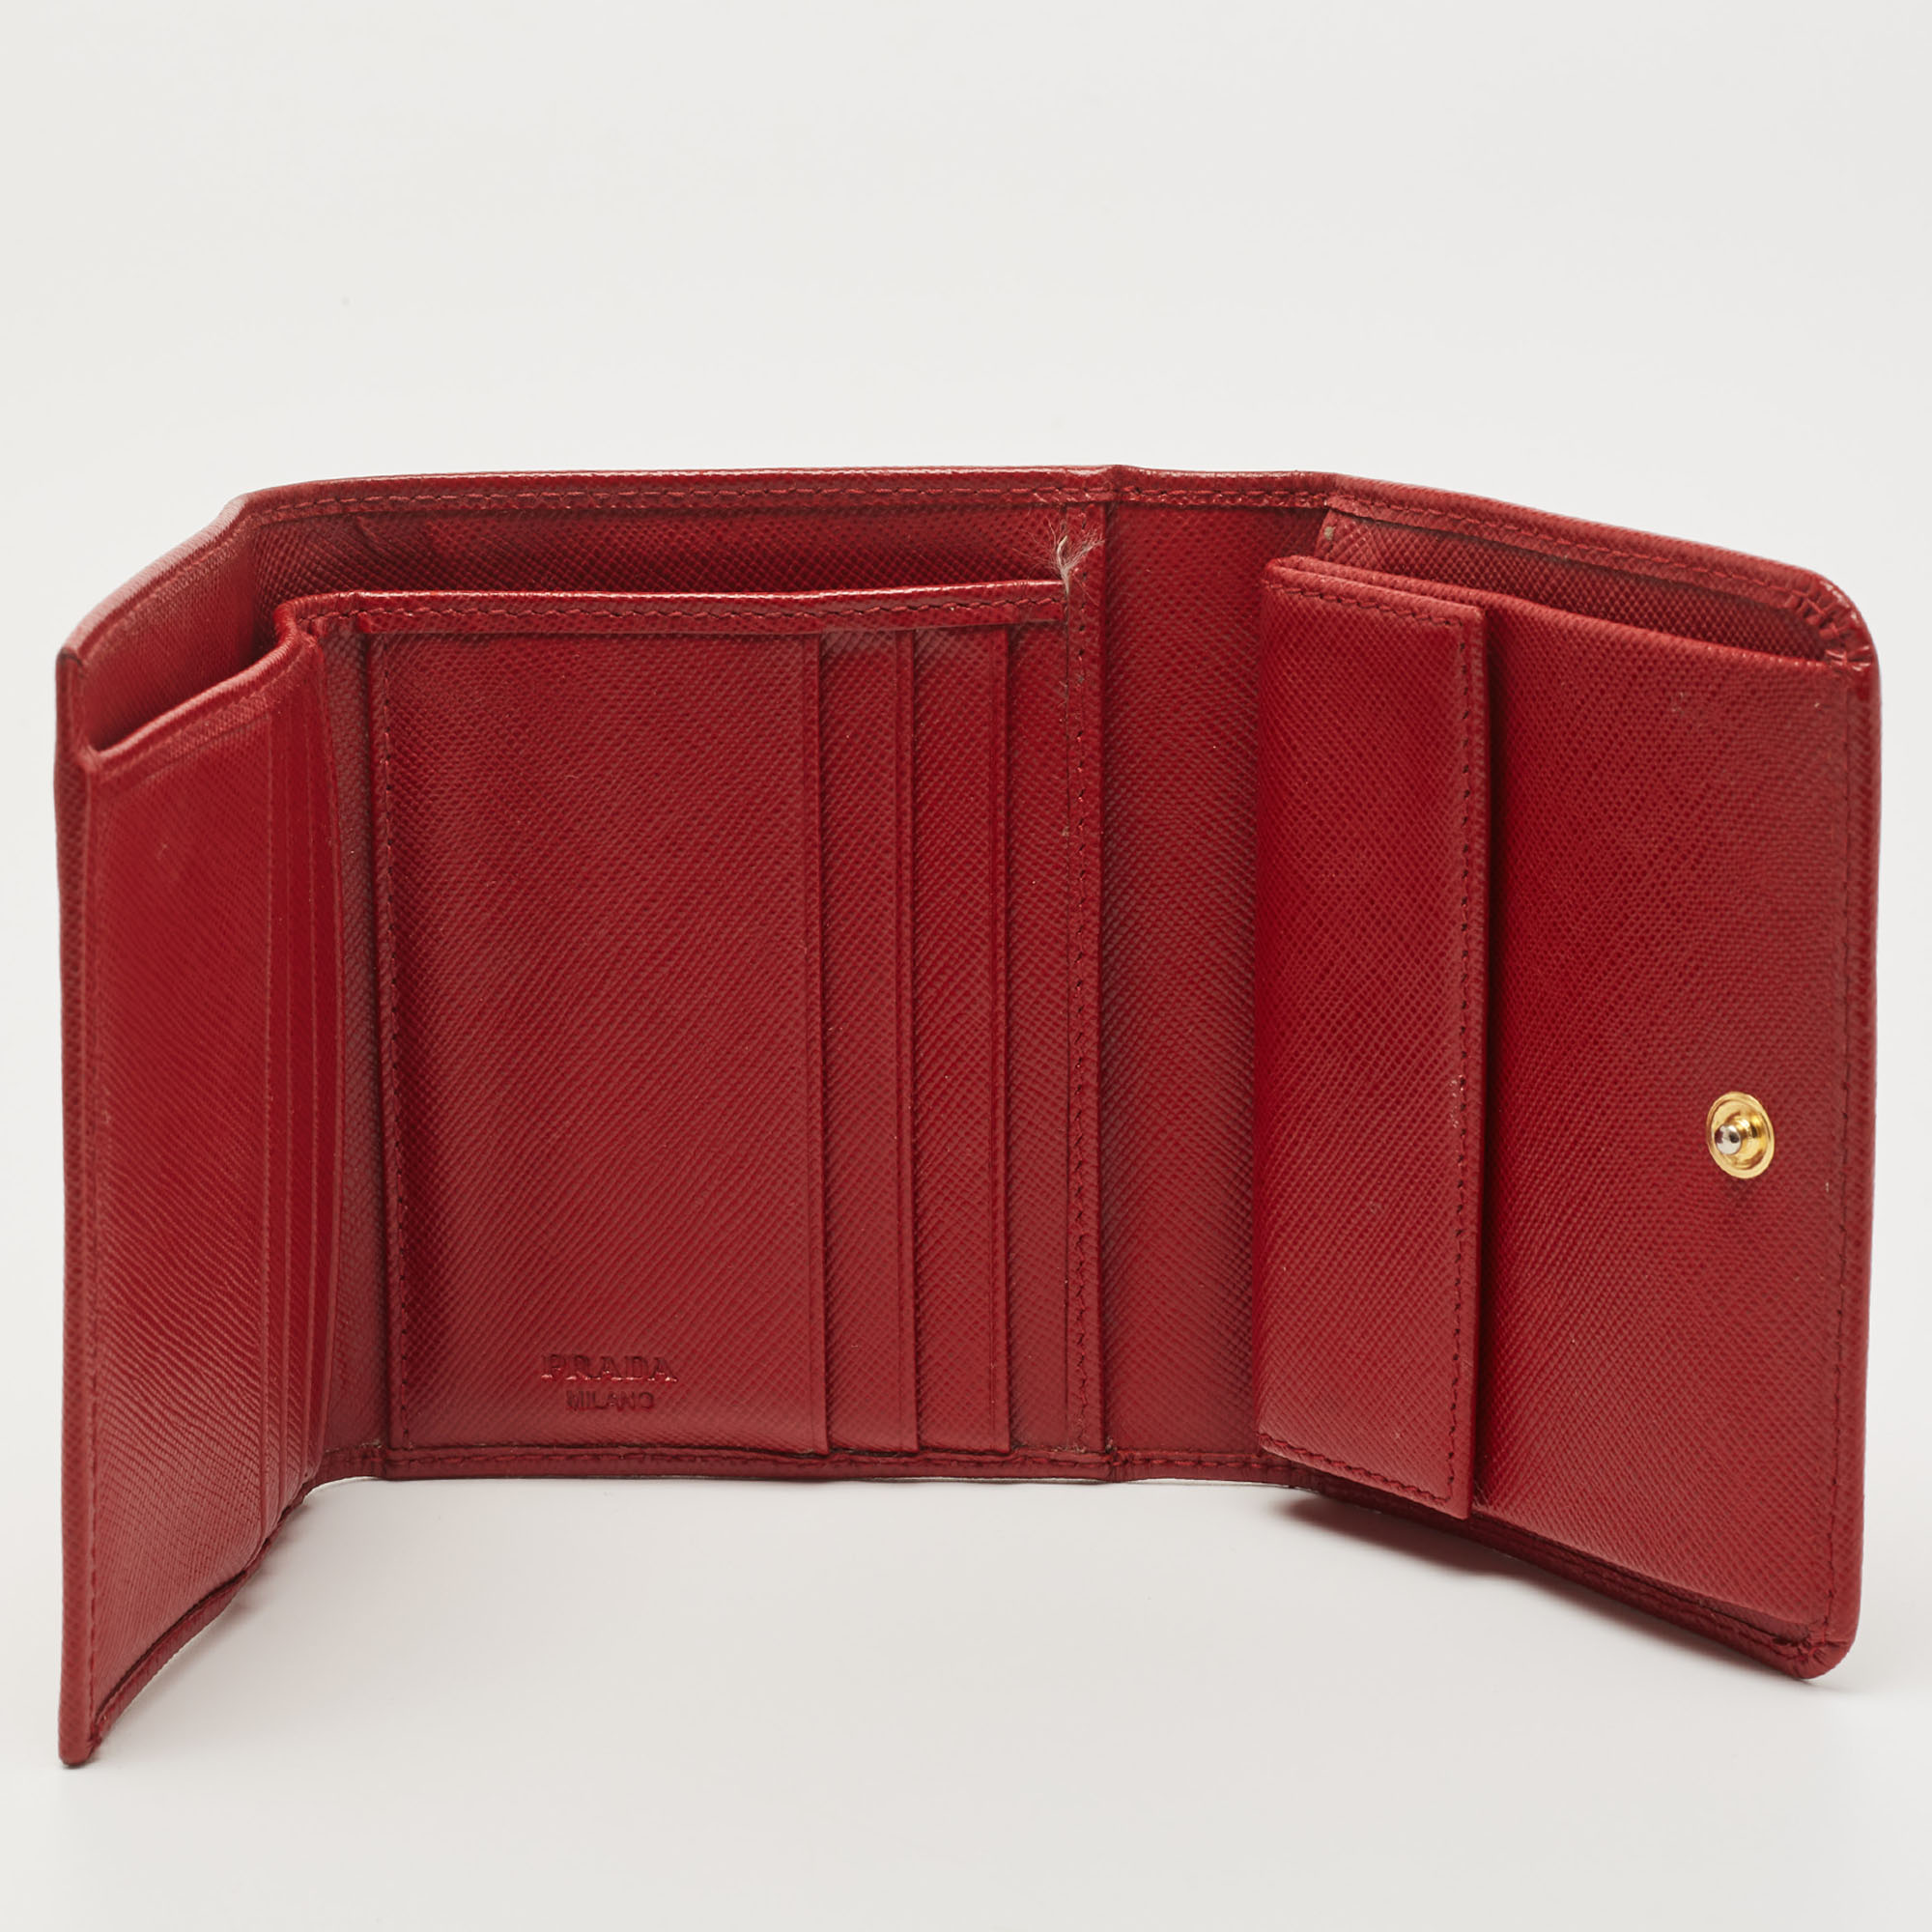 

Prada Red Saffiano Metal Leather Logo Trifold Compact Wallet